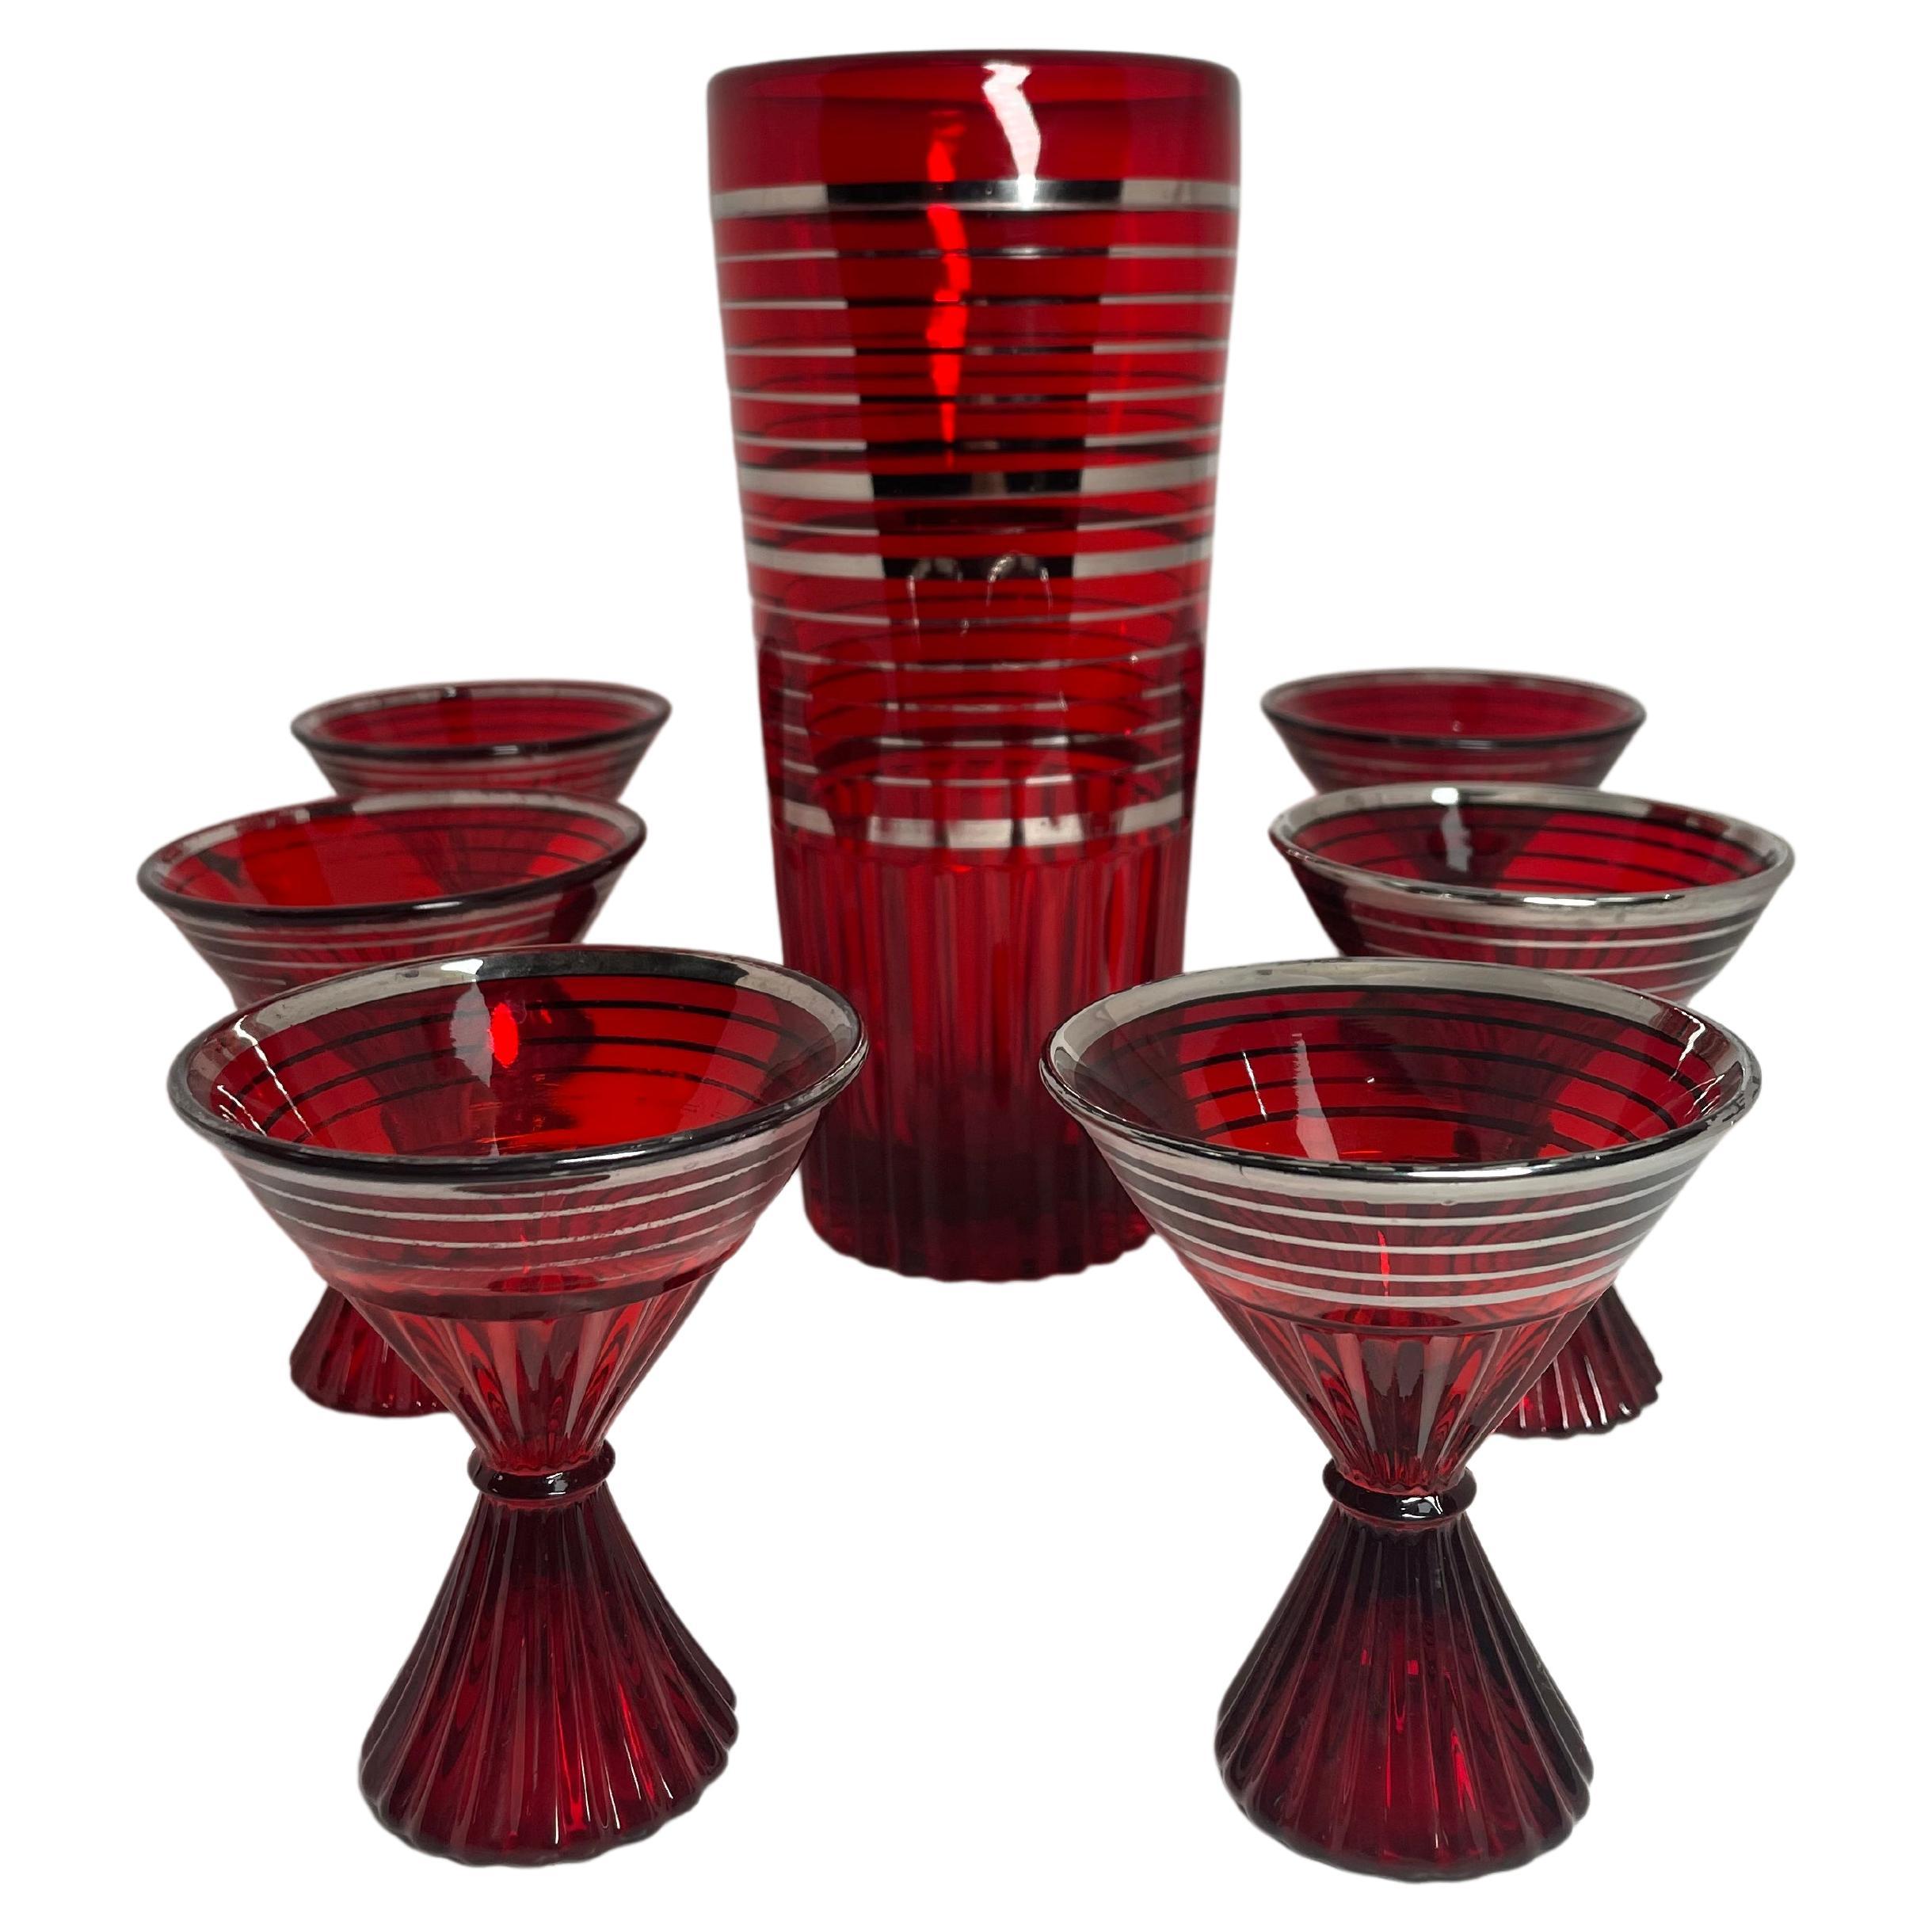 Set of Paden City Ruby Red Glass Cocktail Shaker and Glasses